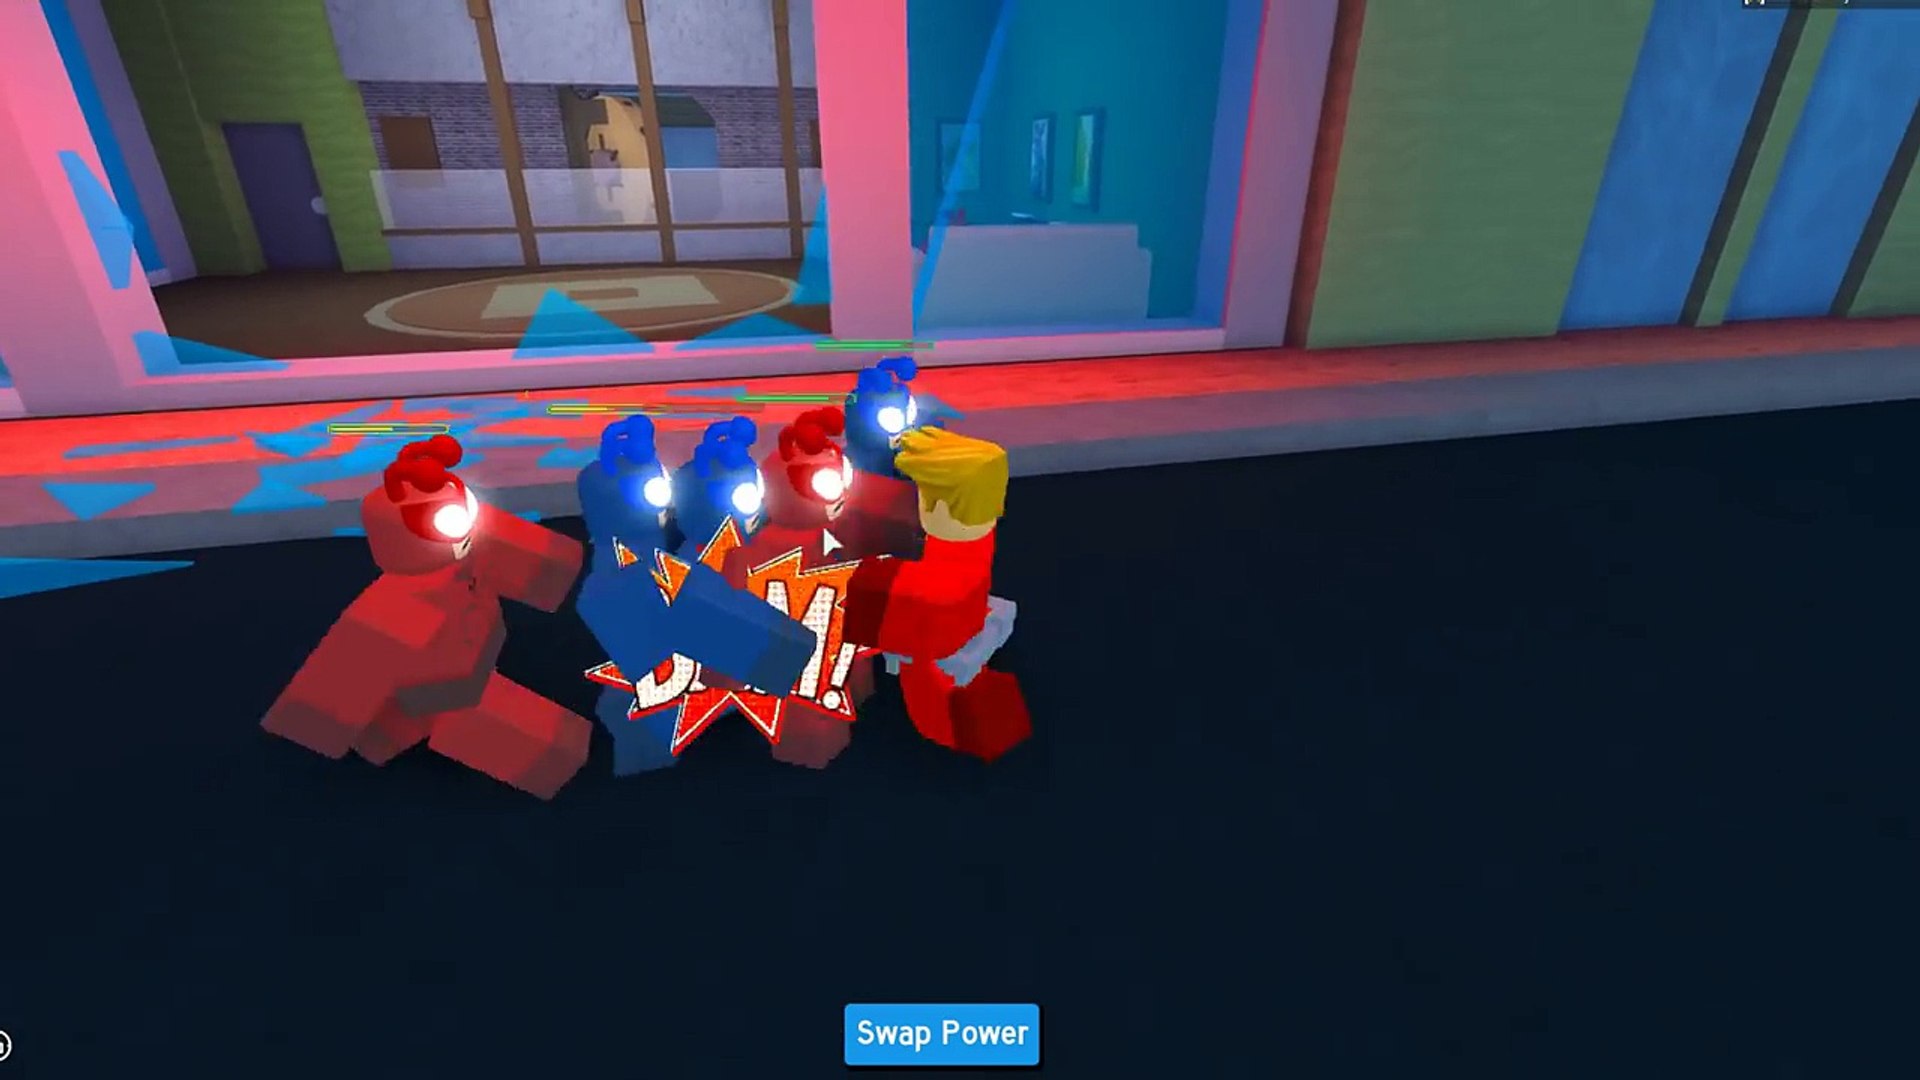 Roblox Lets Play Murder Mystery 2 Radiojh Games Gamer Chad Slg 2020 - heroes of robloxia mission 1